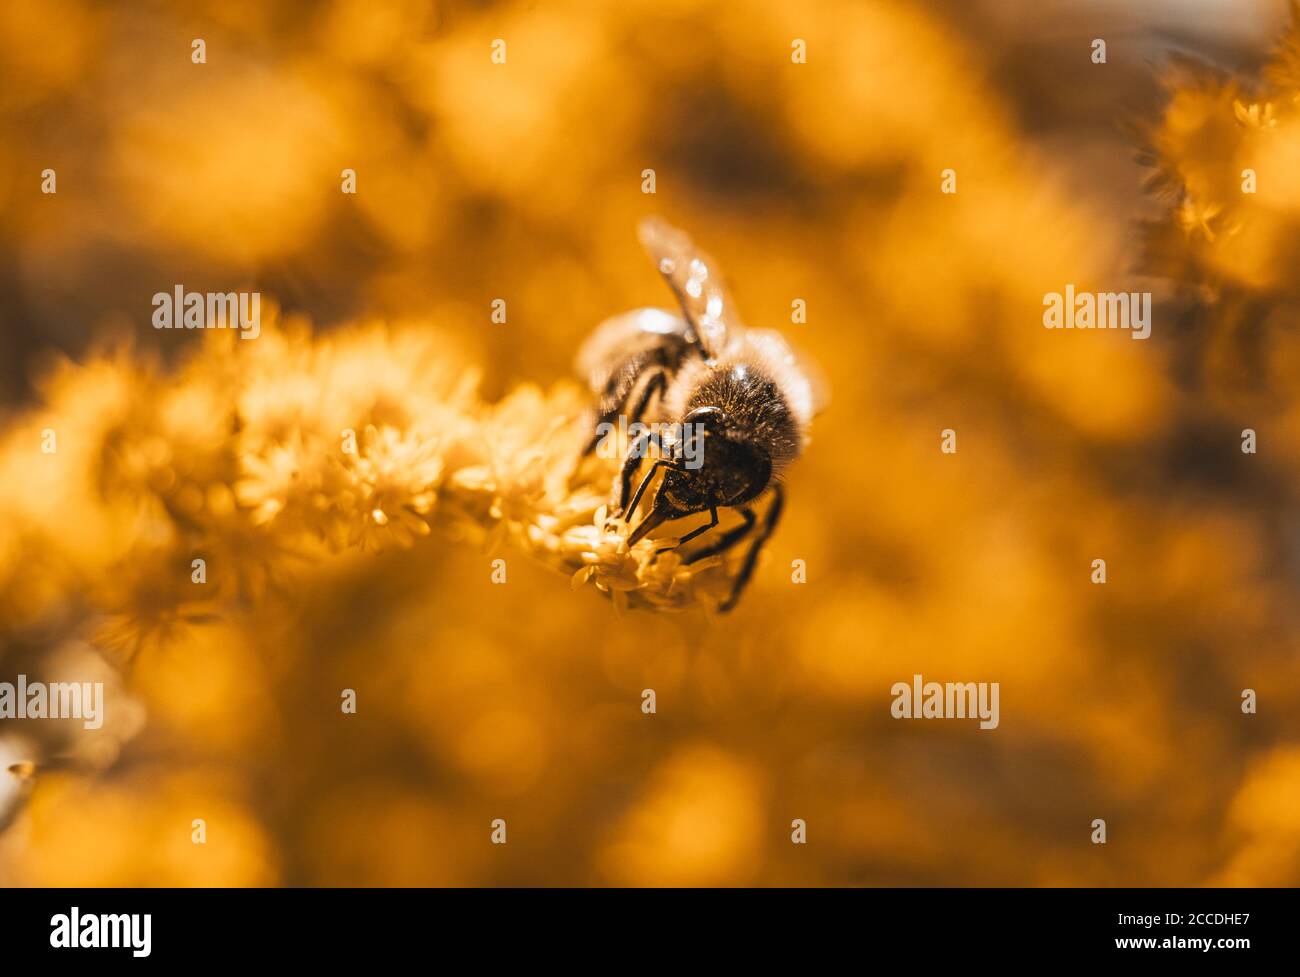 Small hard working bee gathering yellow flower pollen during sunny spring or summer day at the garden. Honeybees known for construction nests from wax Stock Photo